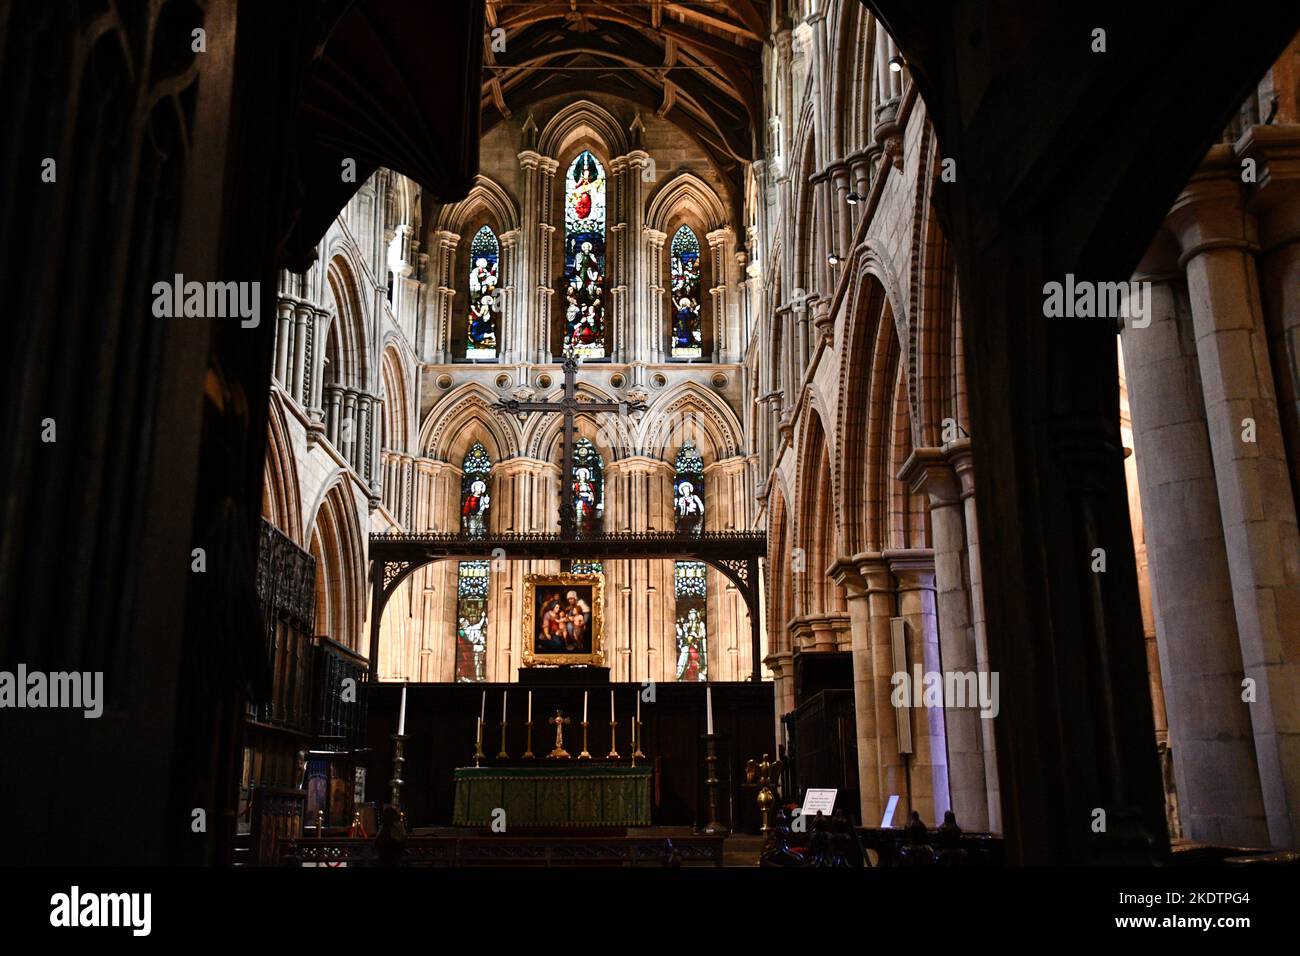 The Choir, High Altar and East window in Hexham Abbey,Hexham,Northumberland,England, UK, Great Britain. Stock Photo